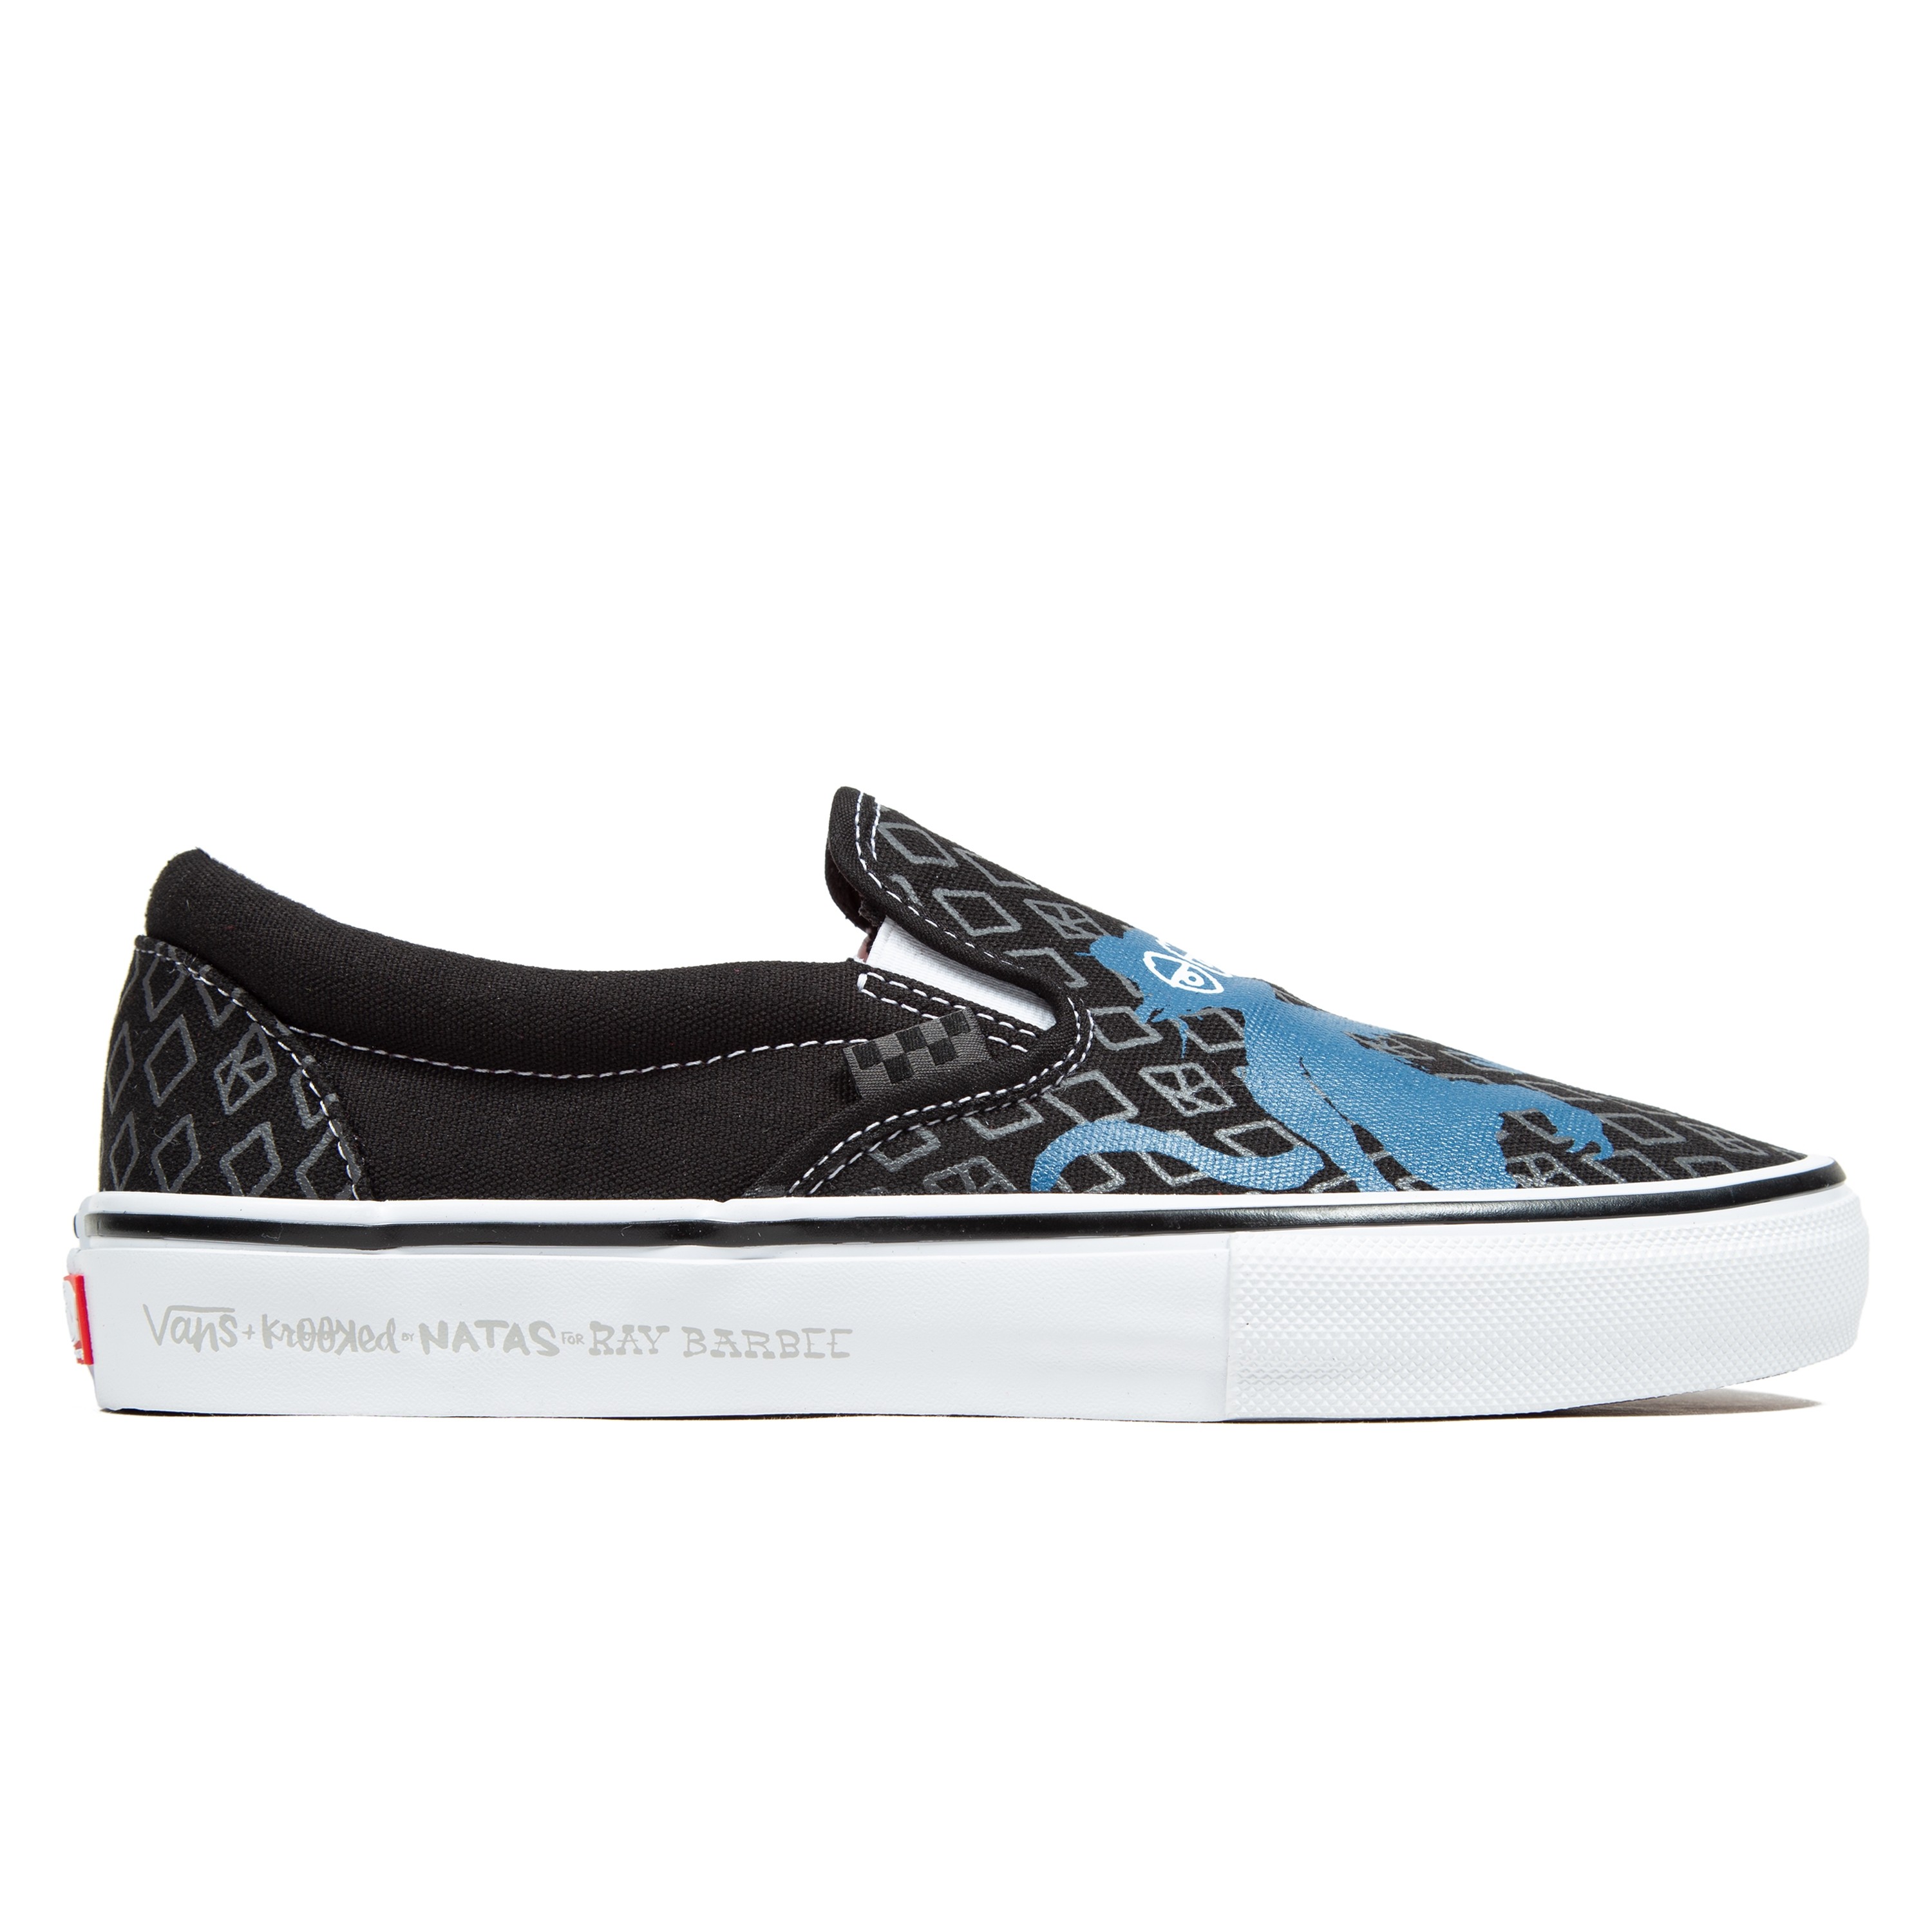 Vans Skate x Krooked by Natas for Ray Slip-On (Black) - VN0A5FCAAPM ...